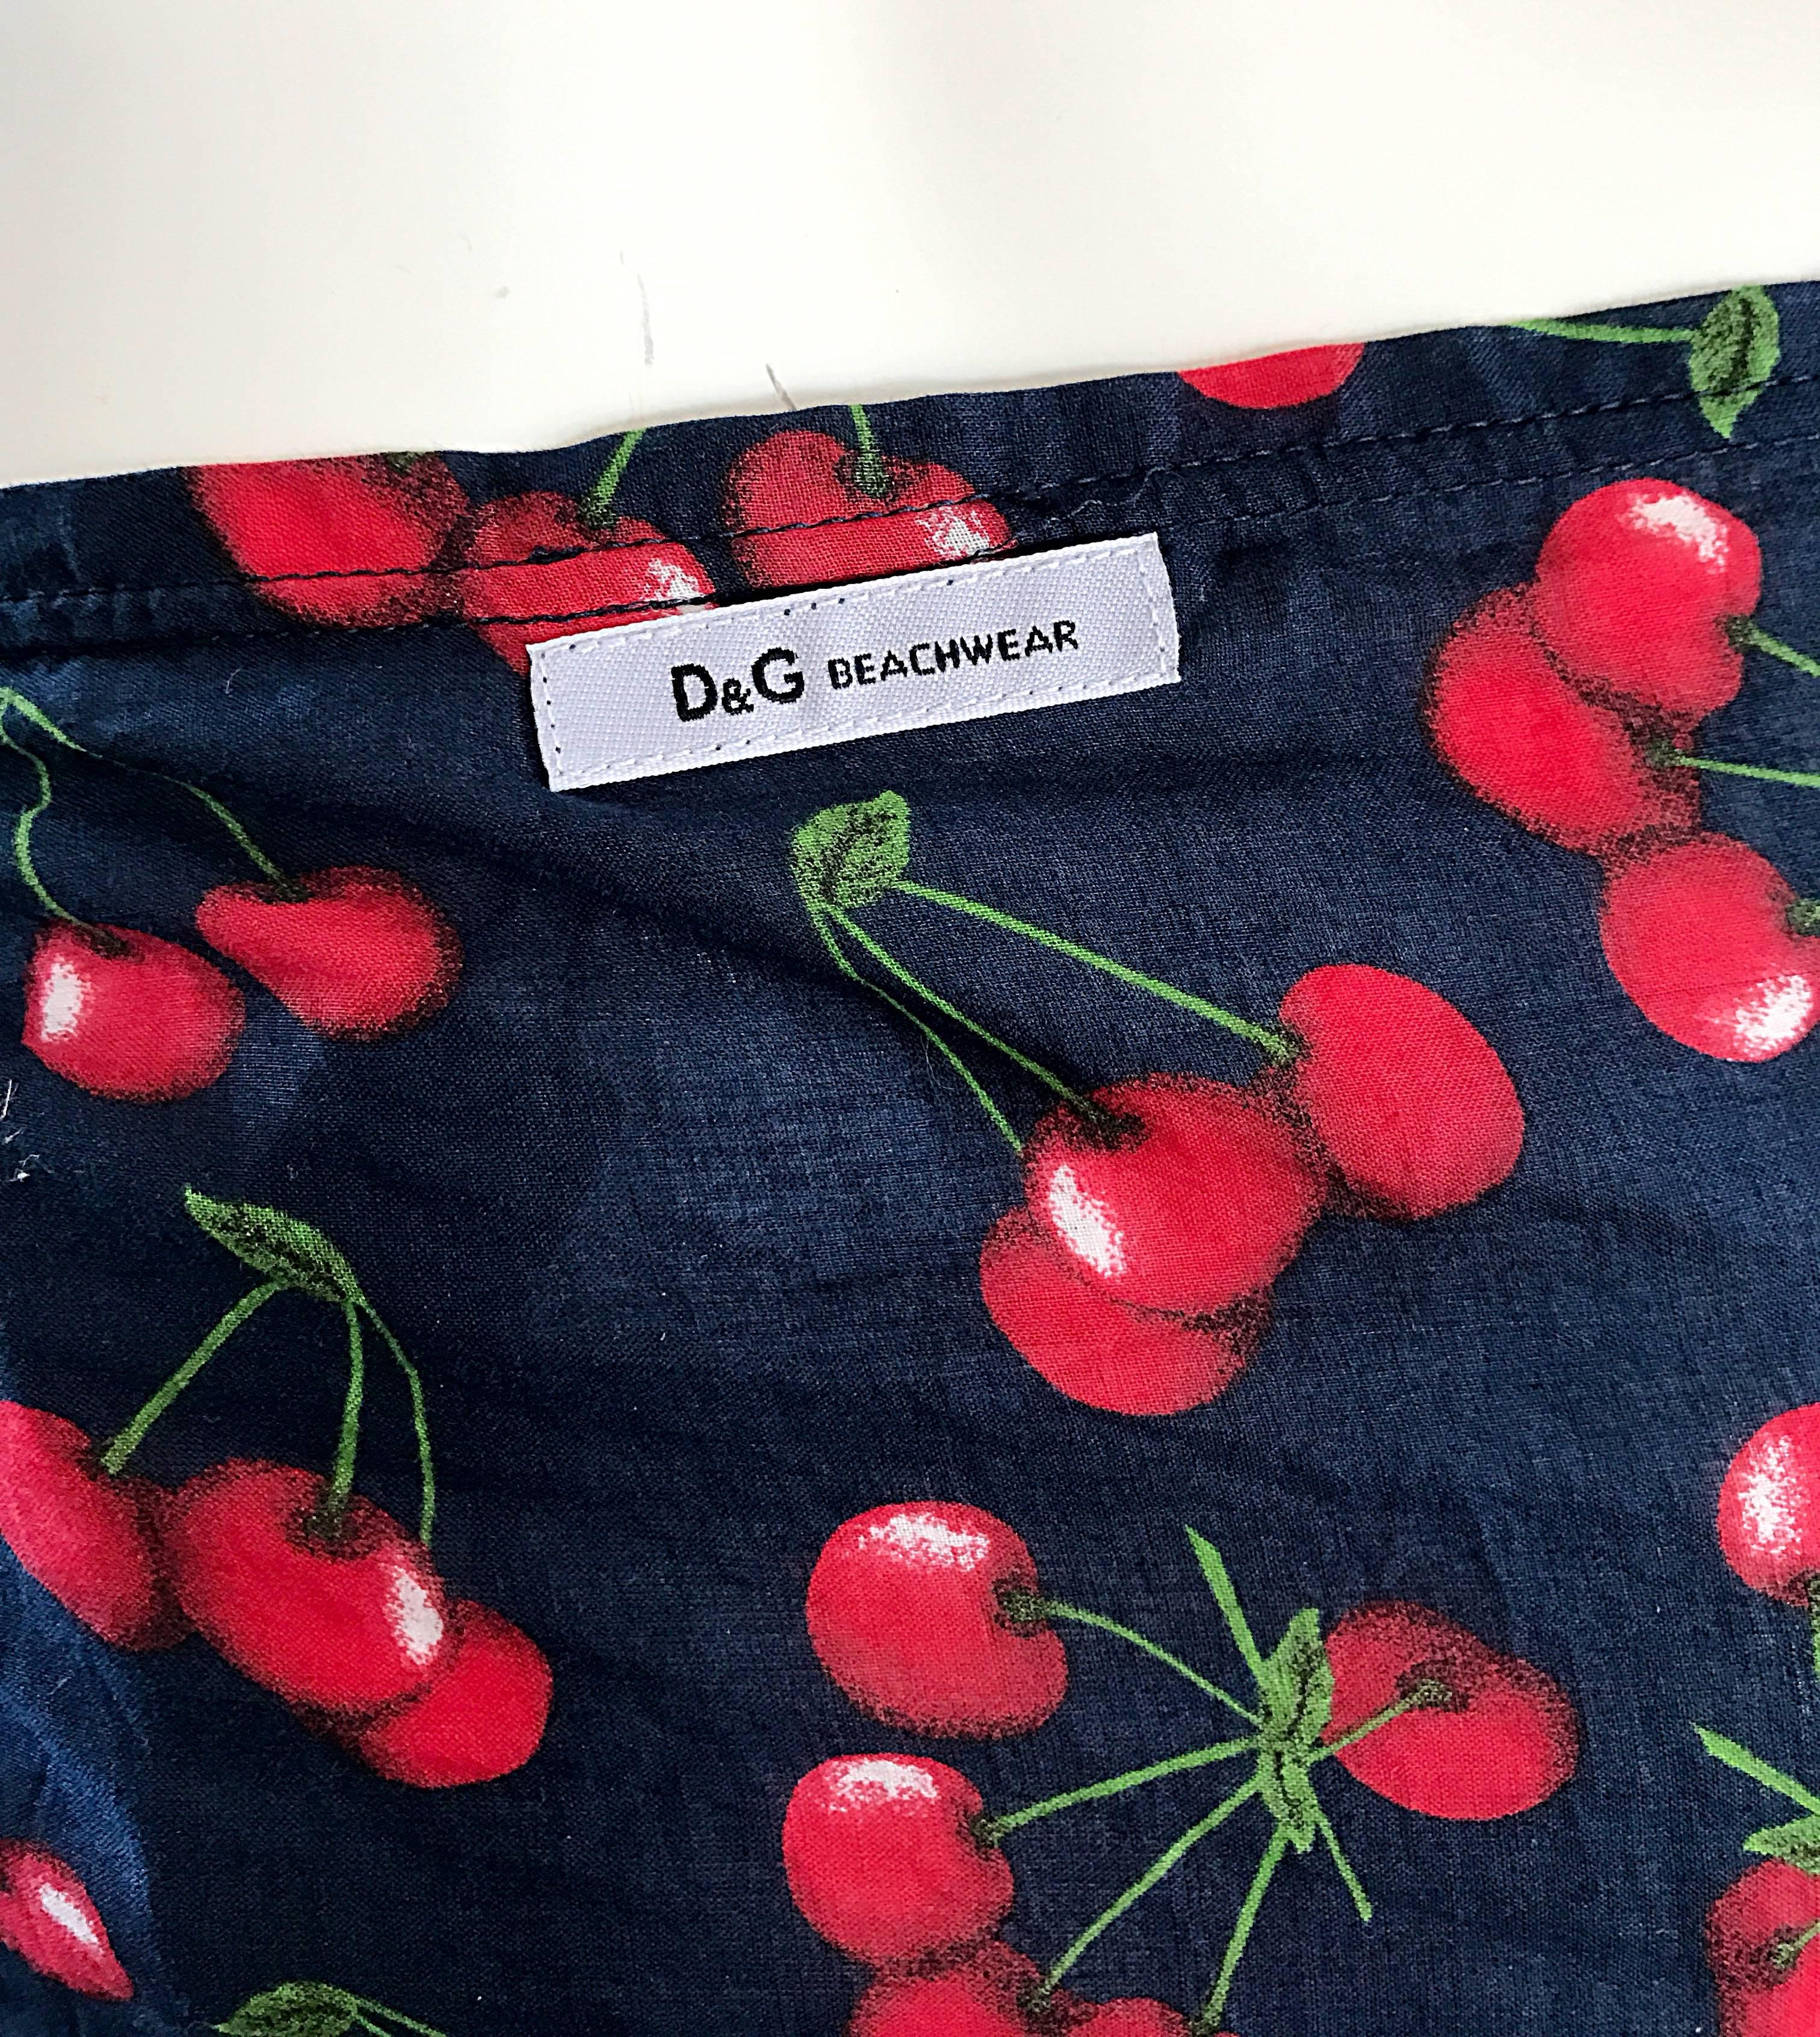 NWT 1990s Dolce and Gabbana Black and Red Cherry Print Swimsuit Cover Up Skirt 2